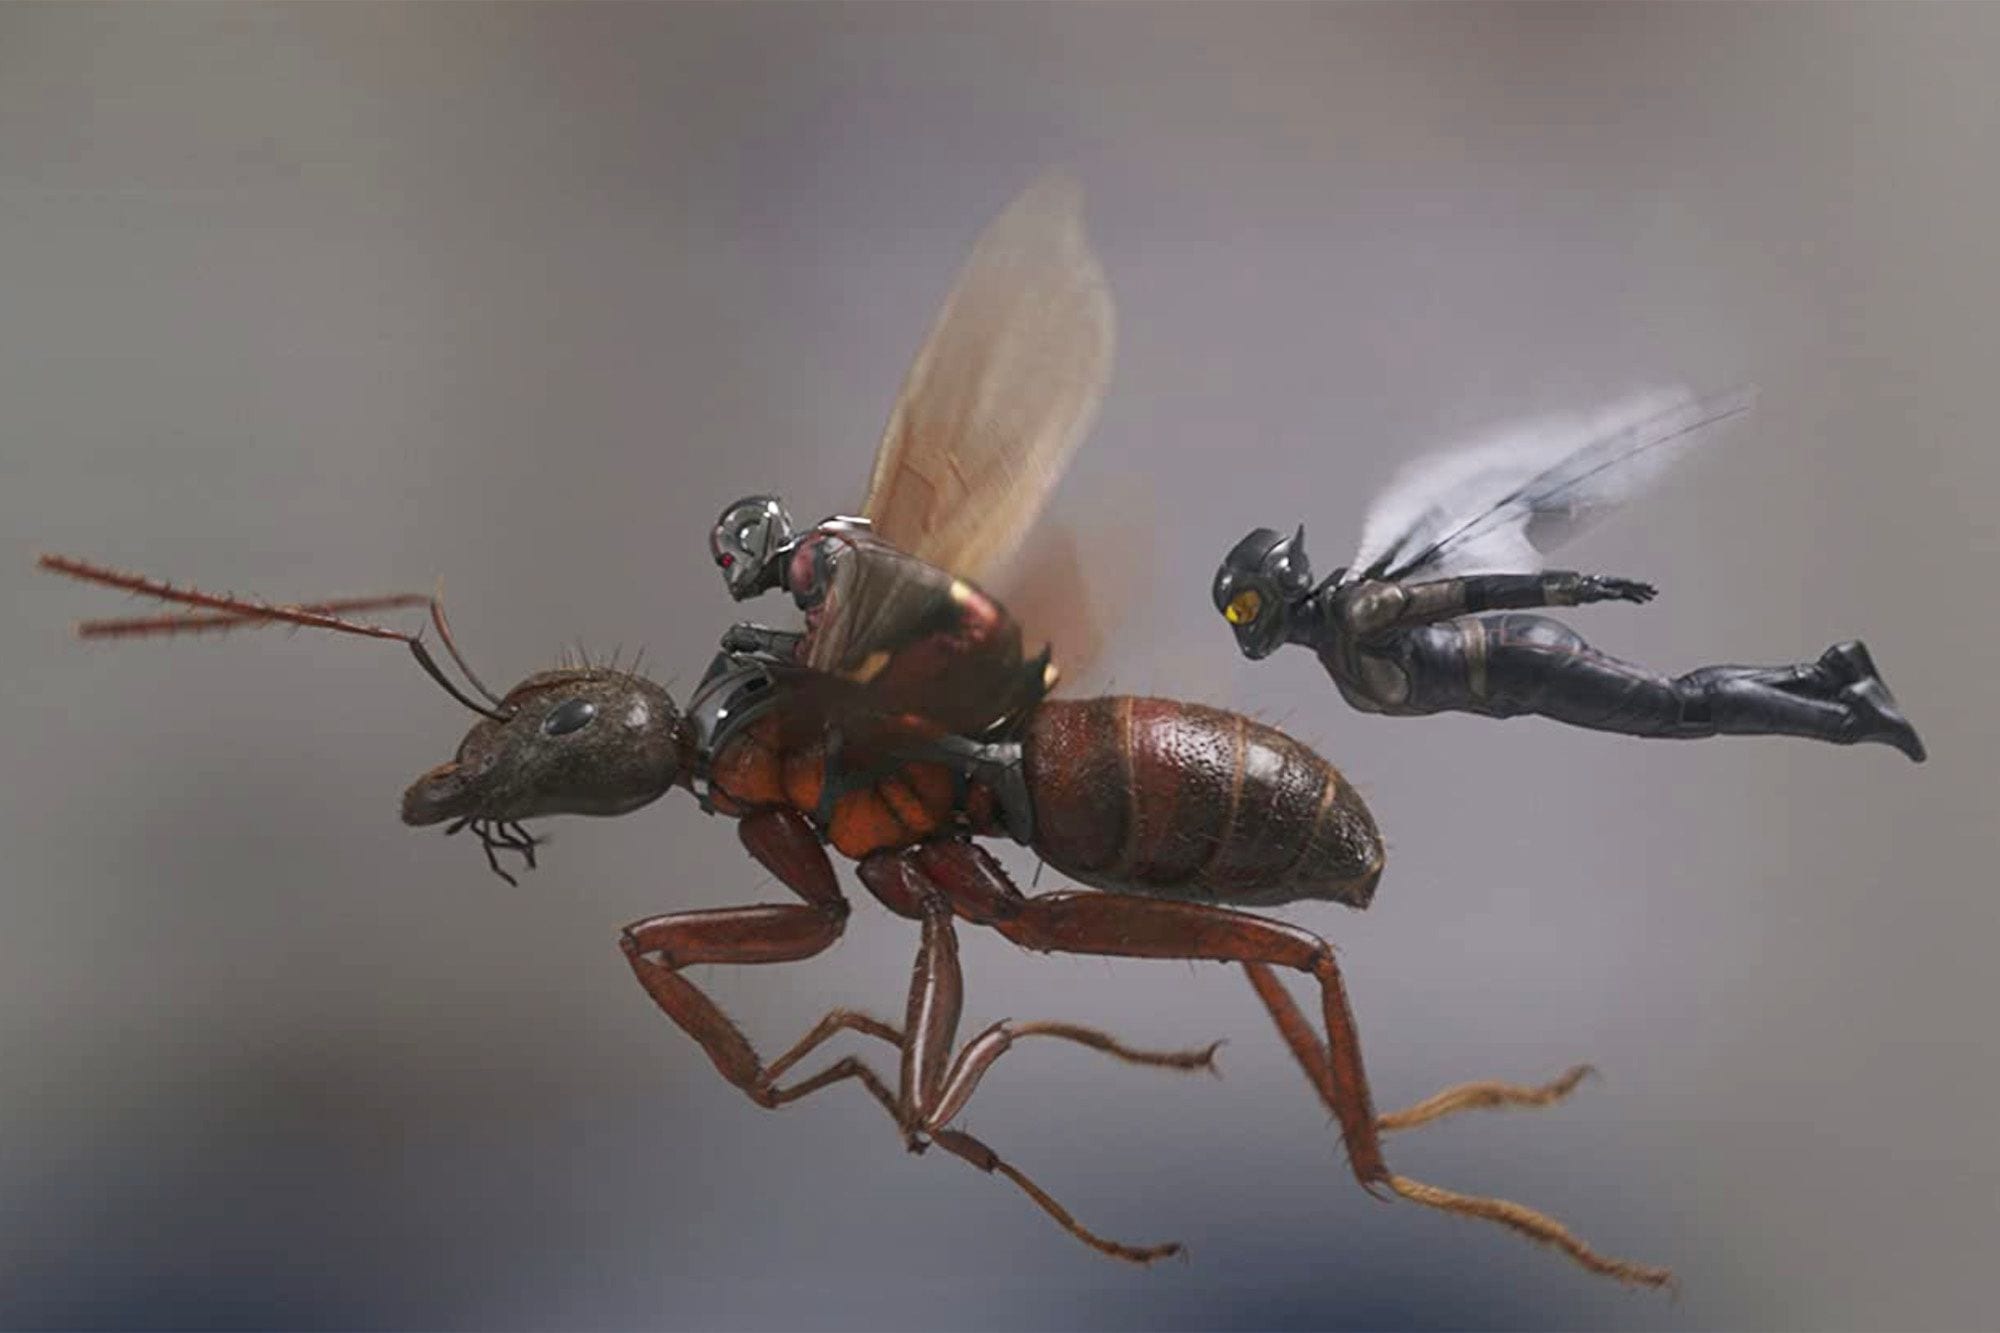 The Obstacles in ‘Ant-Man and the Wasp’ Are Not Typical of MCU